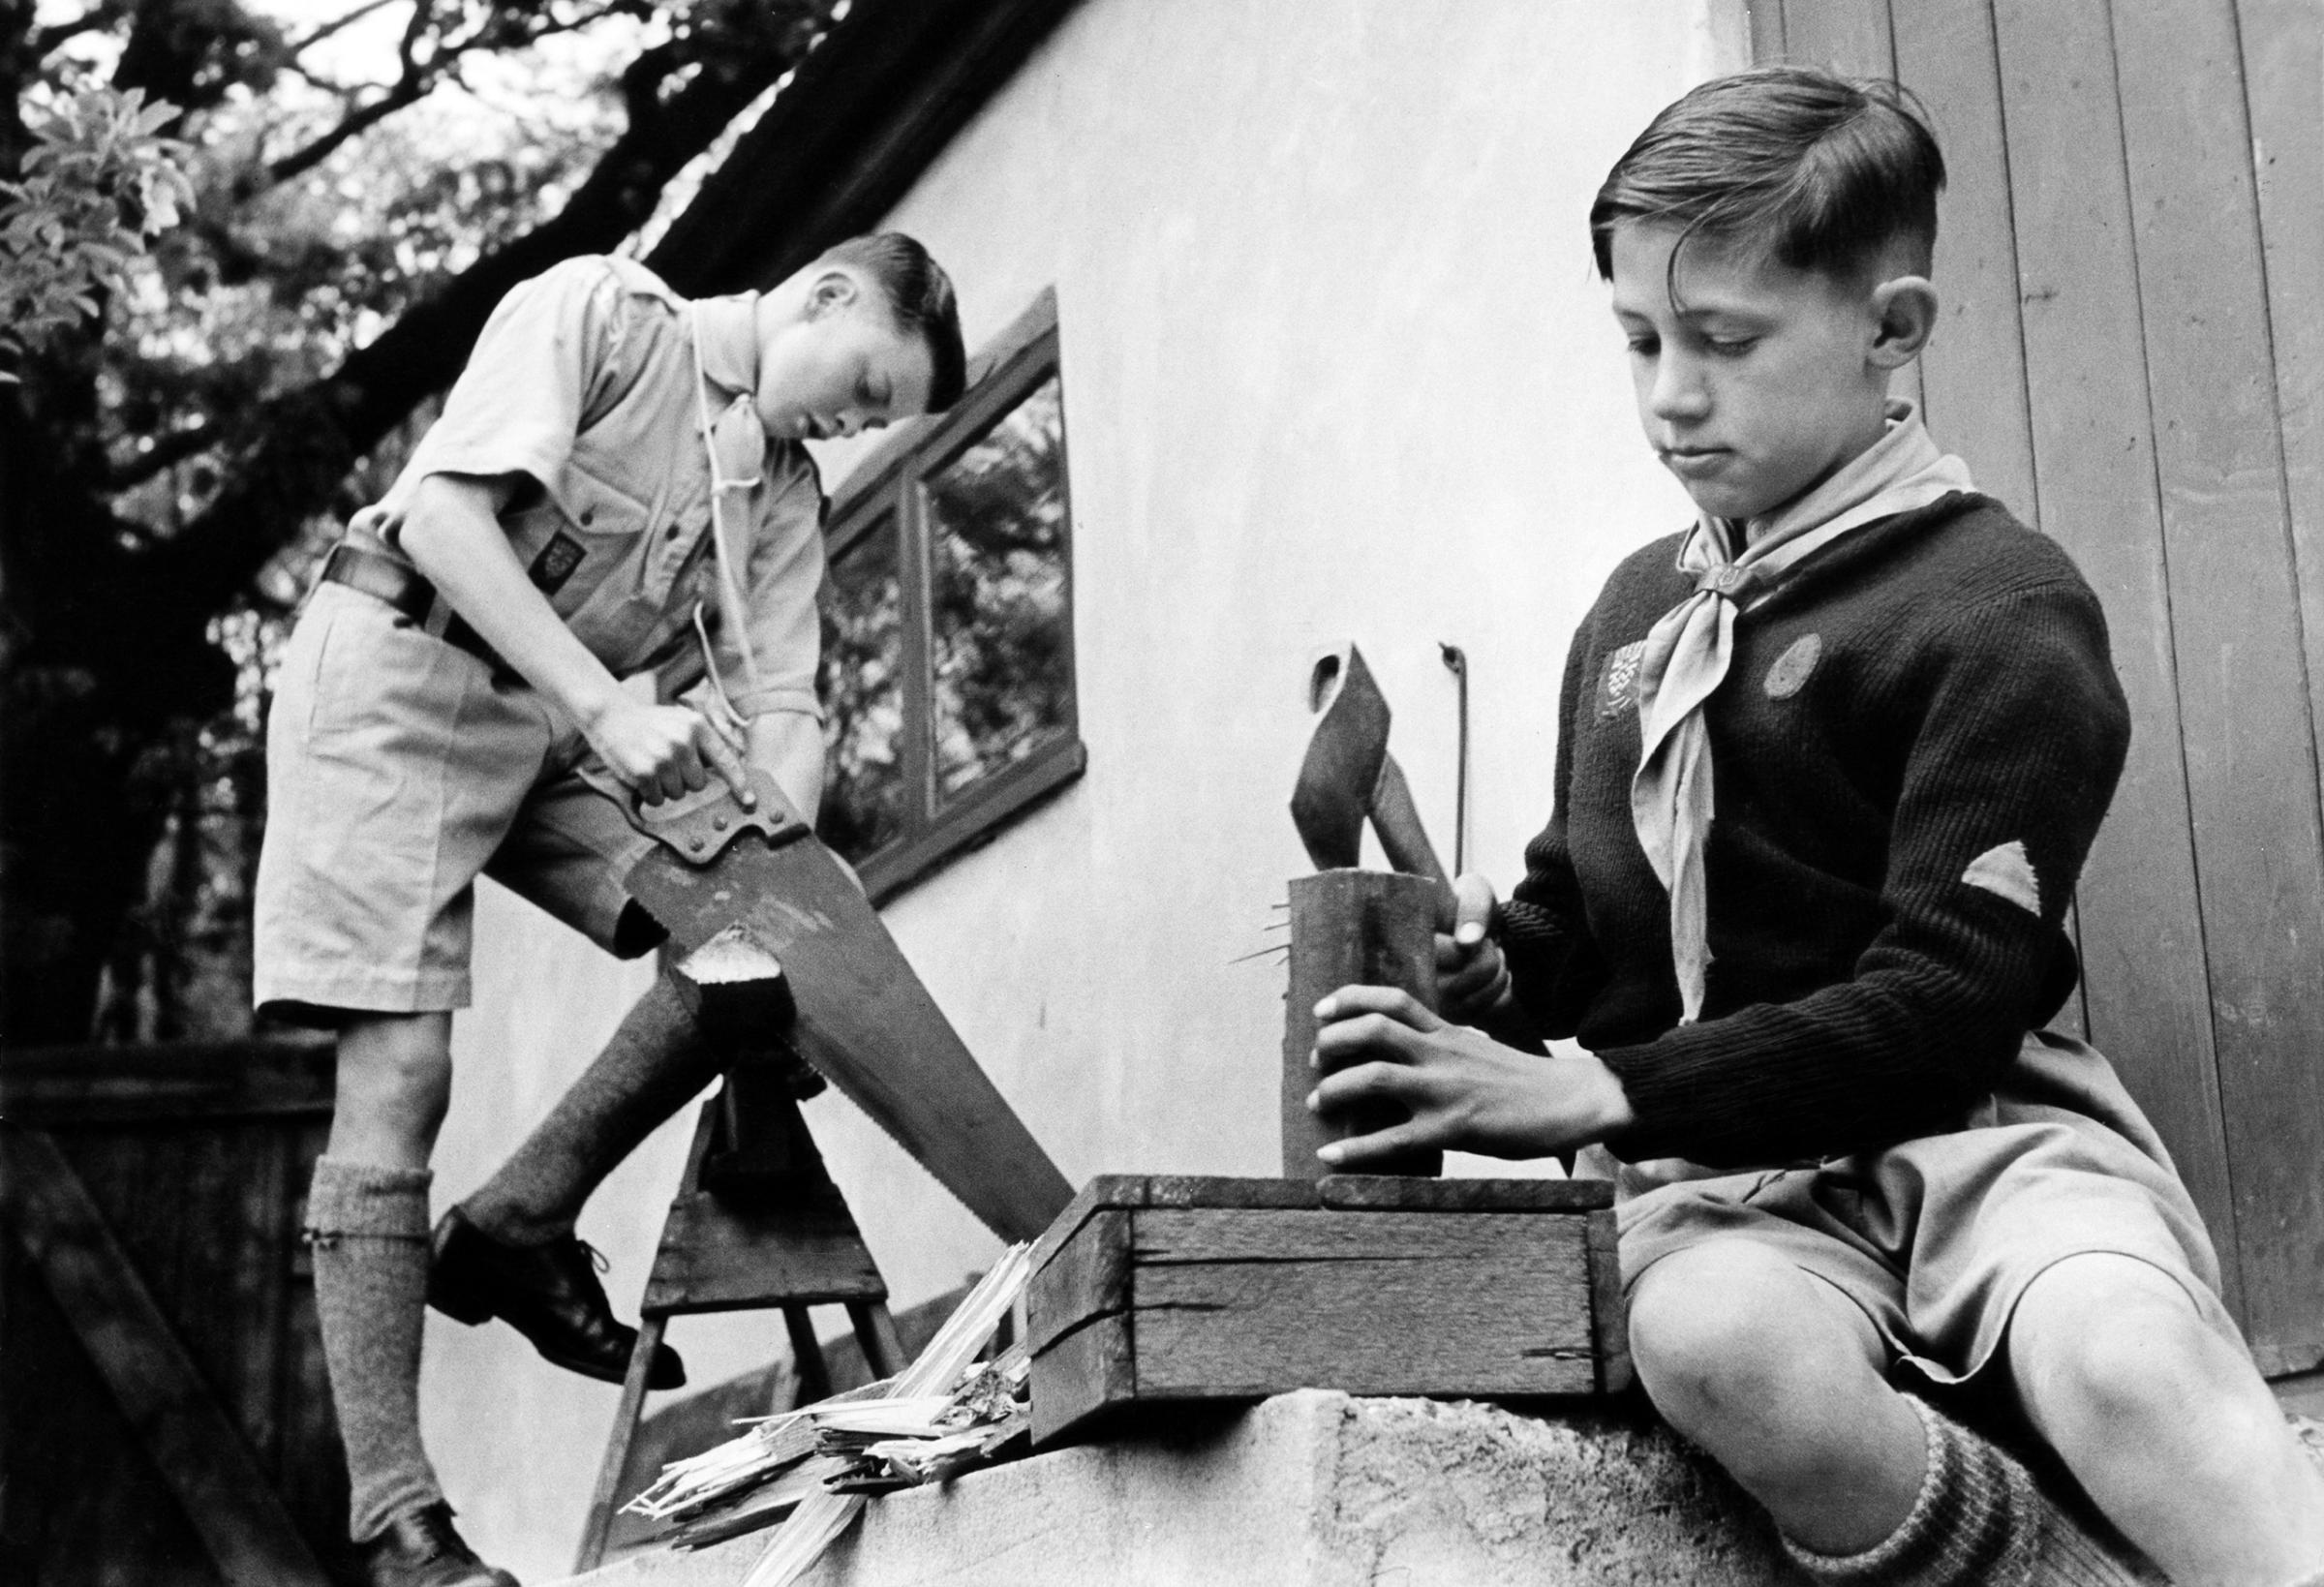 Boy scouts of the 7th Royal Eltham Troop earning money for the Boy Scout Association by chopping firewood, 1949.